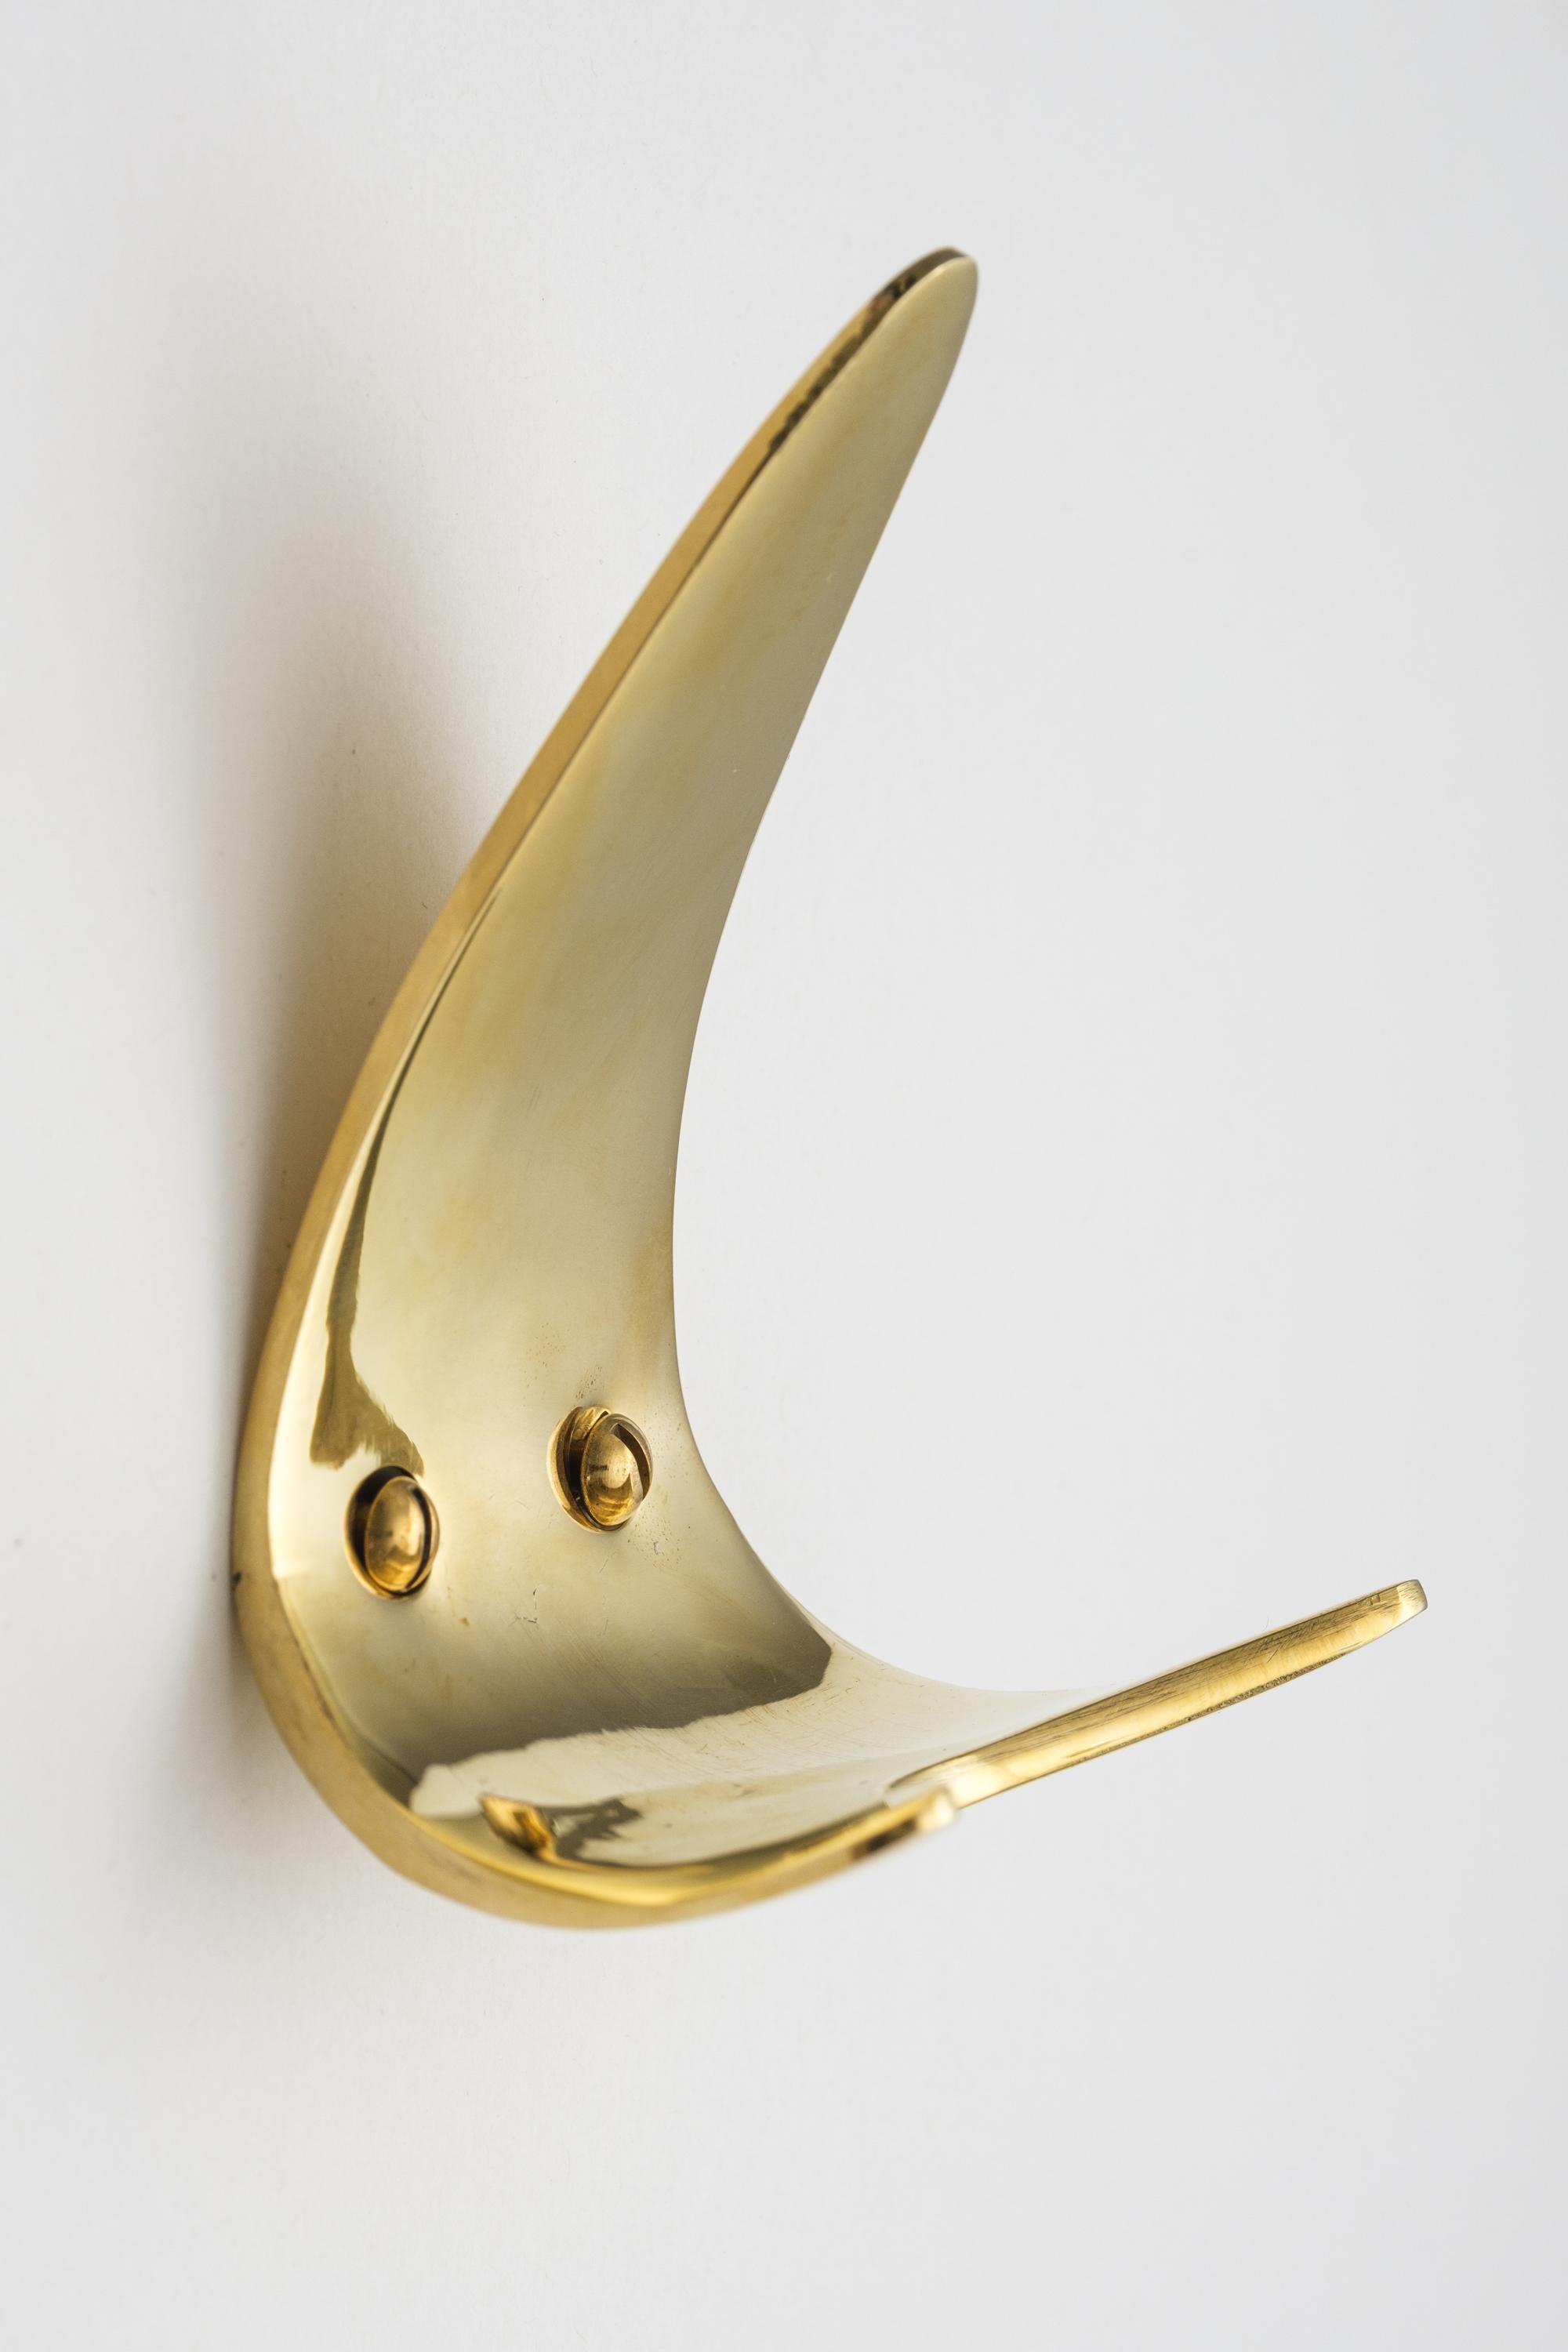 Contemporary Carl Auböck Model #4086 Hook in Polished Brass For Sale